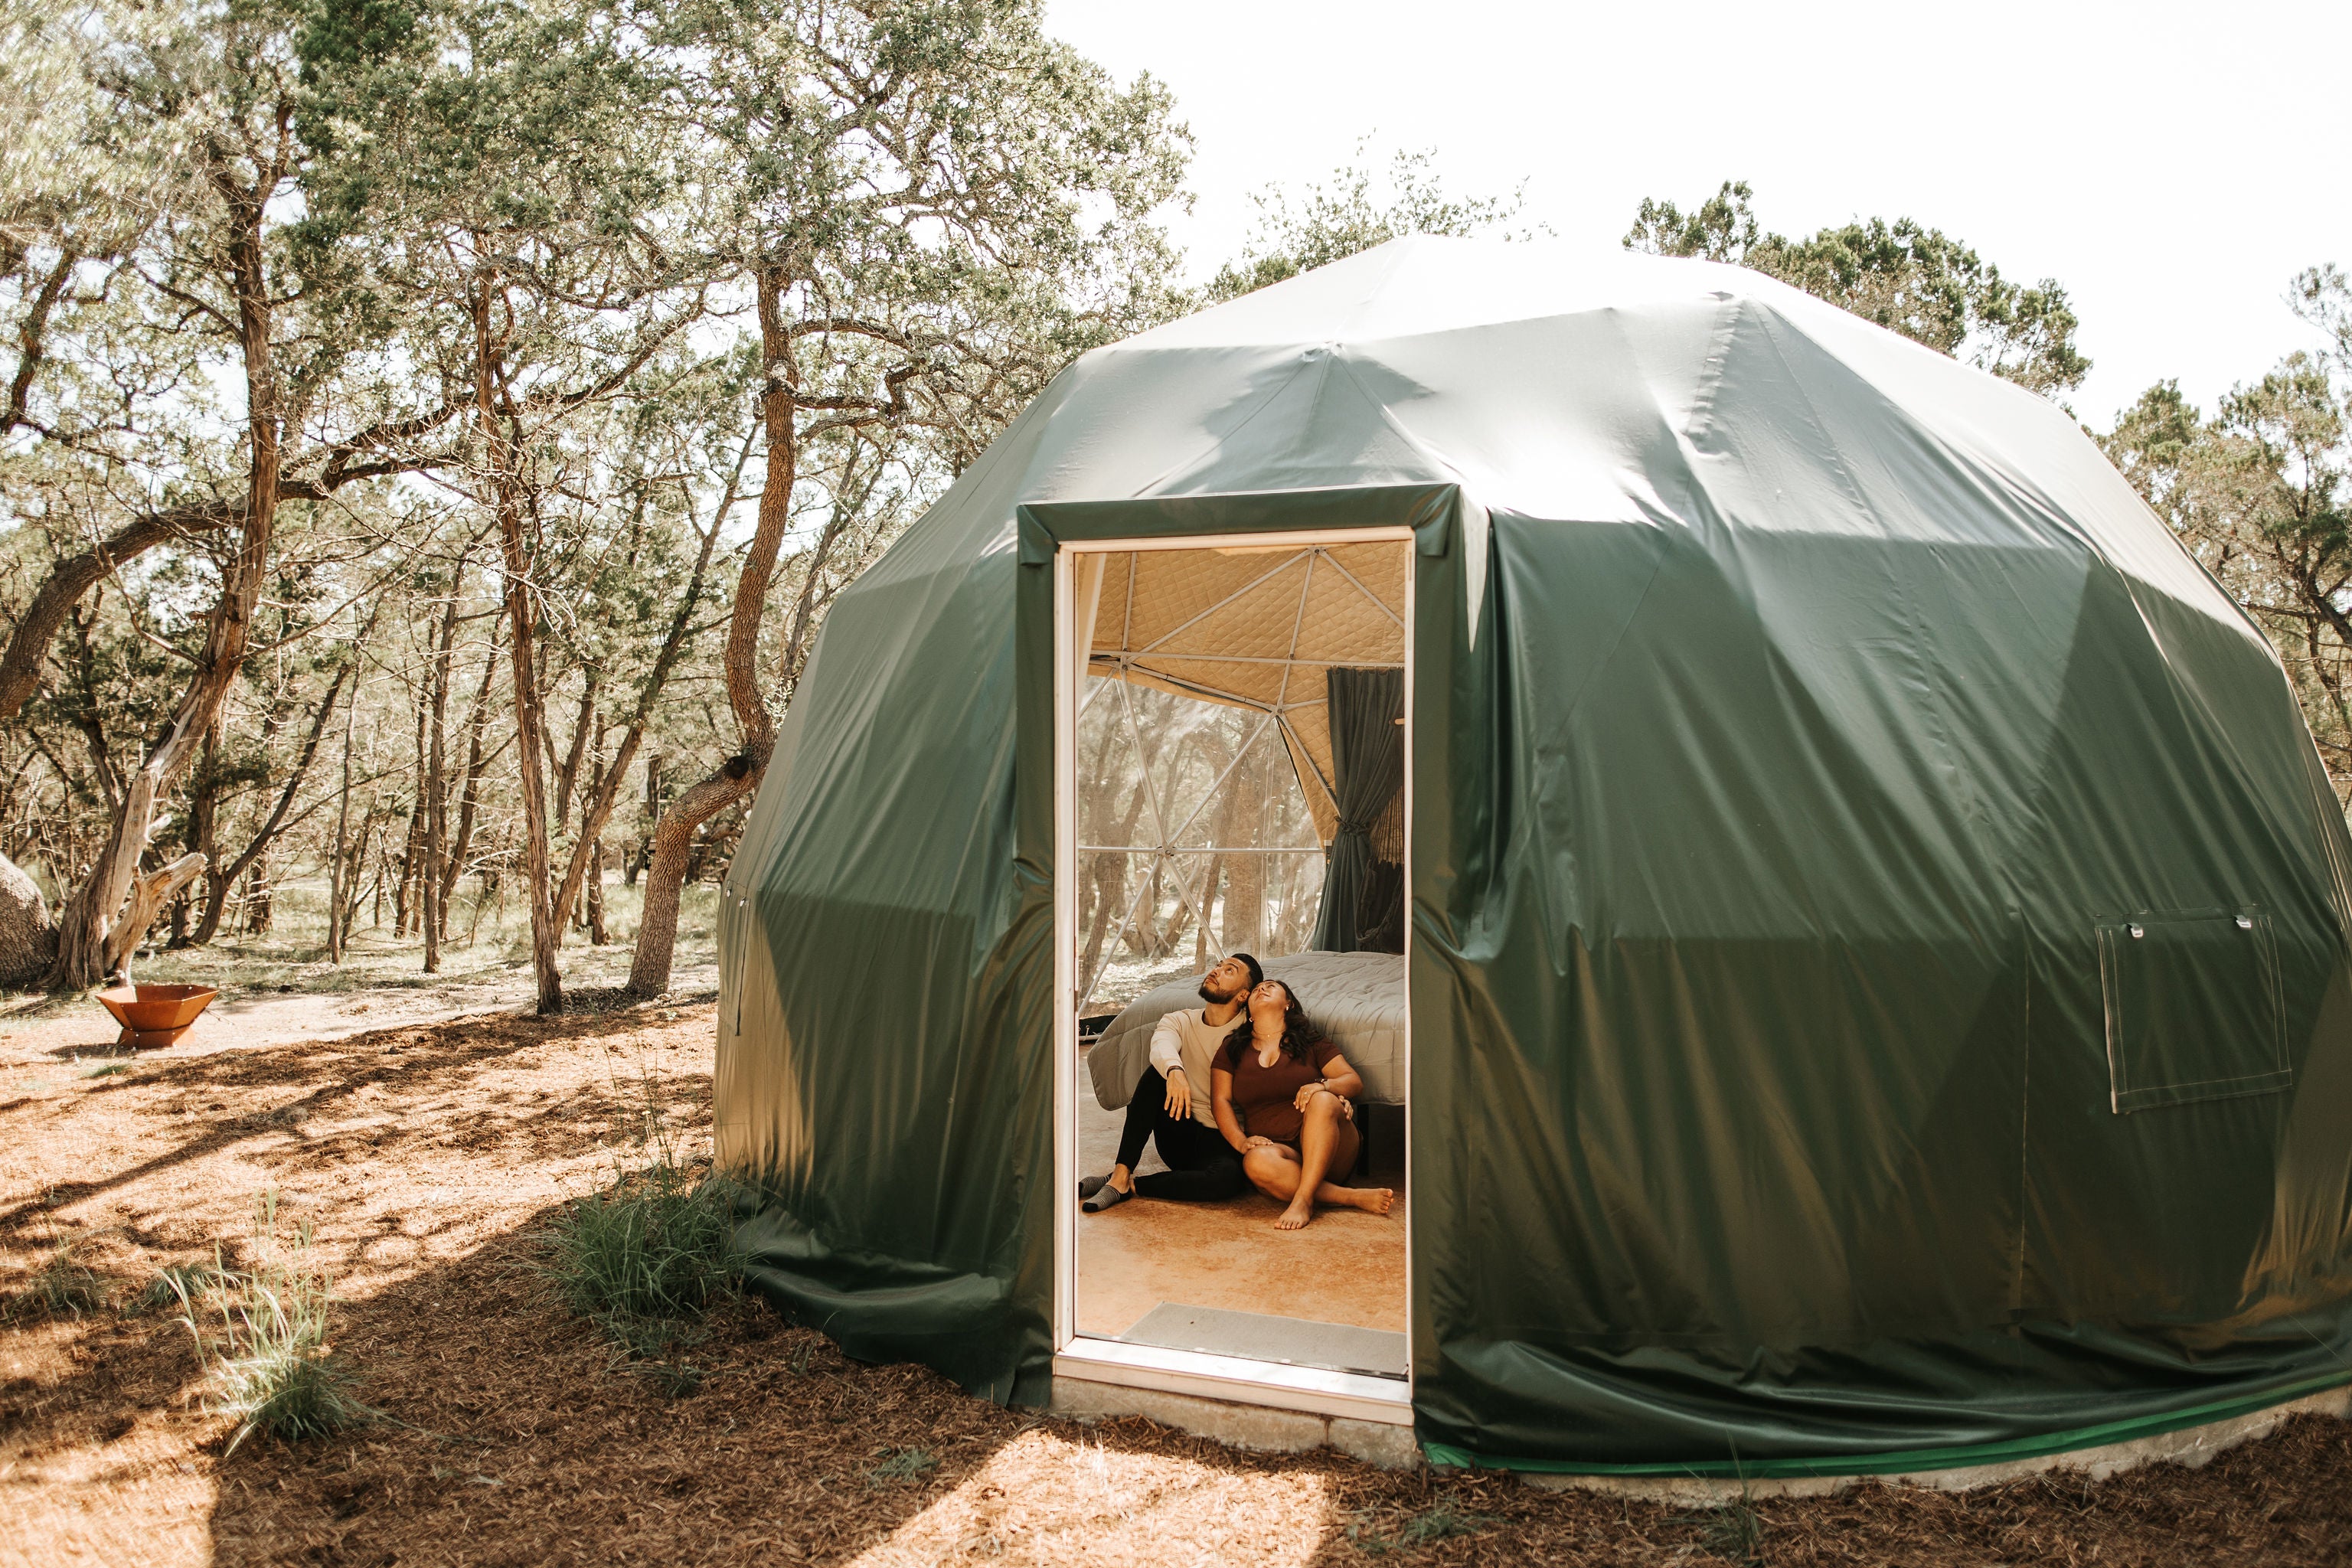 Why Glamping Geodesic Dome Tents Are Perfect for the Global Glamping Trend